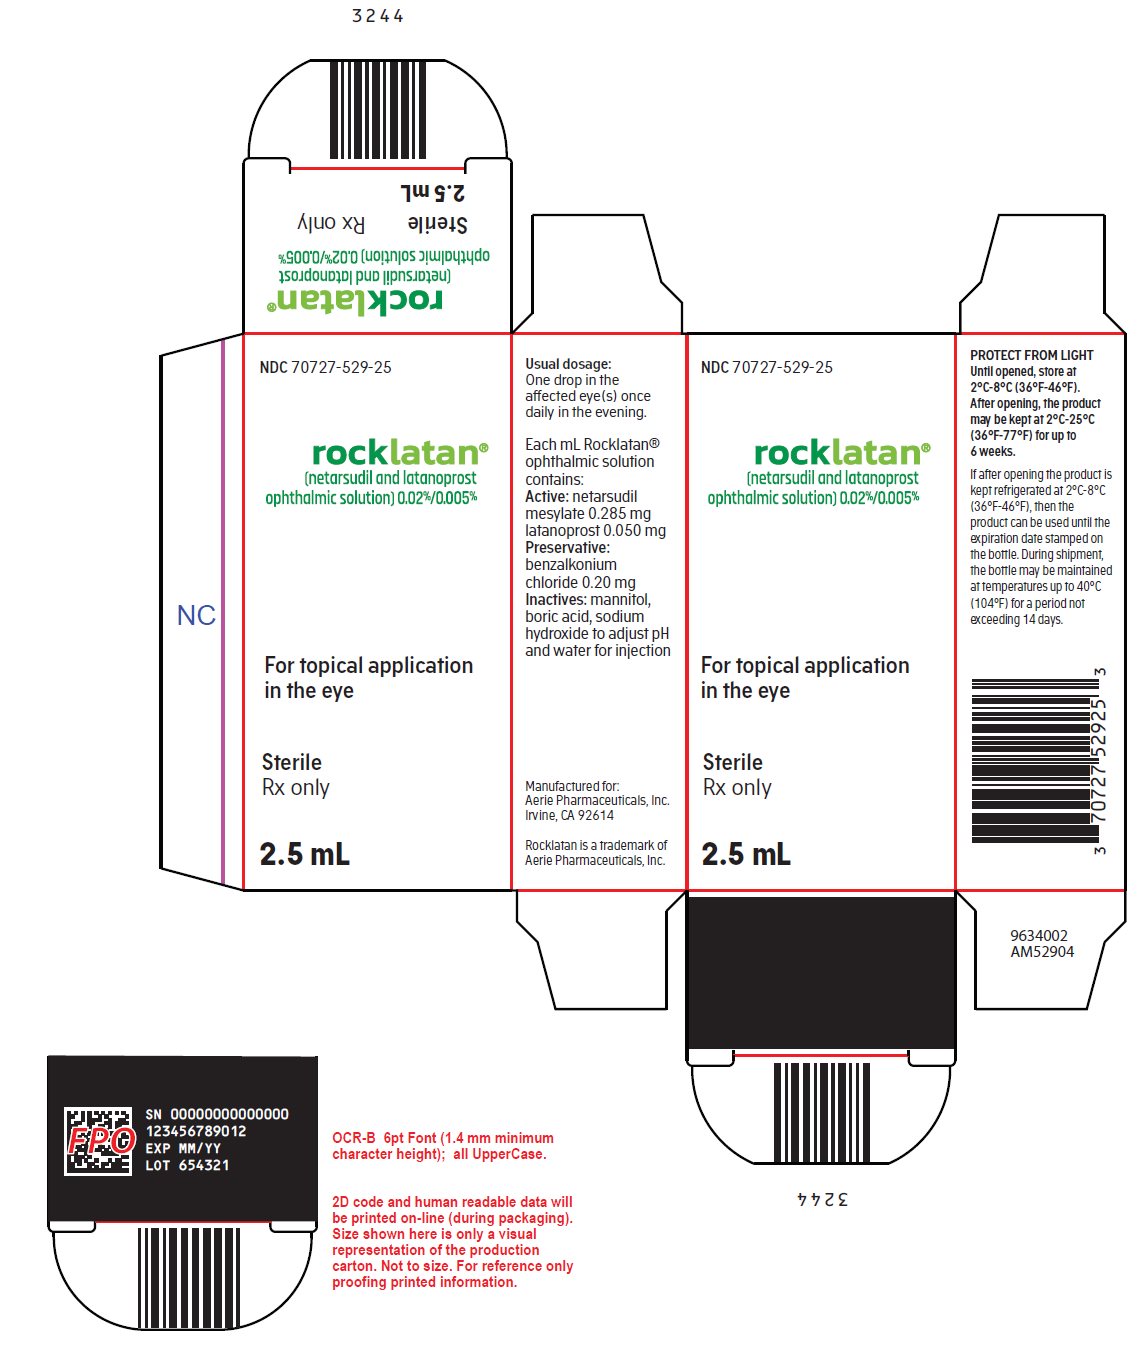 Rocklatan (netarsudil and latanoprost ophthalmic solution) 0.02%/0.005% carton label